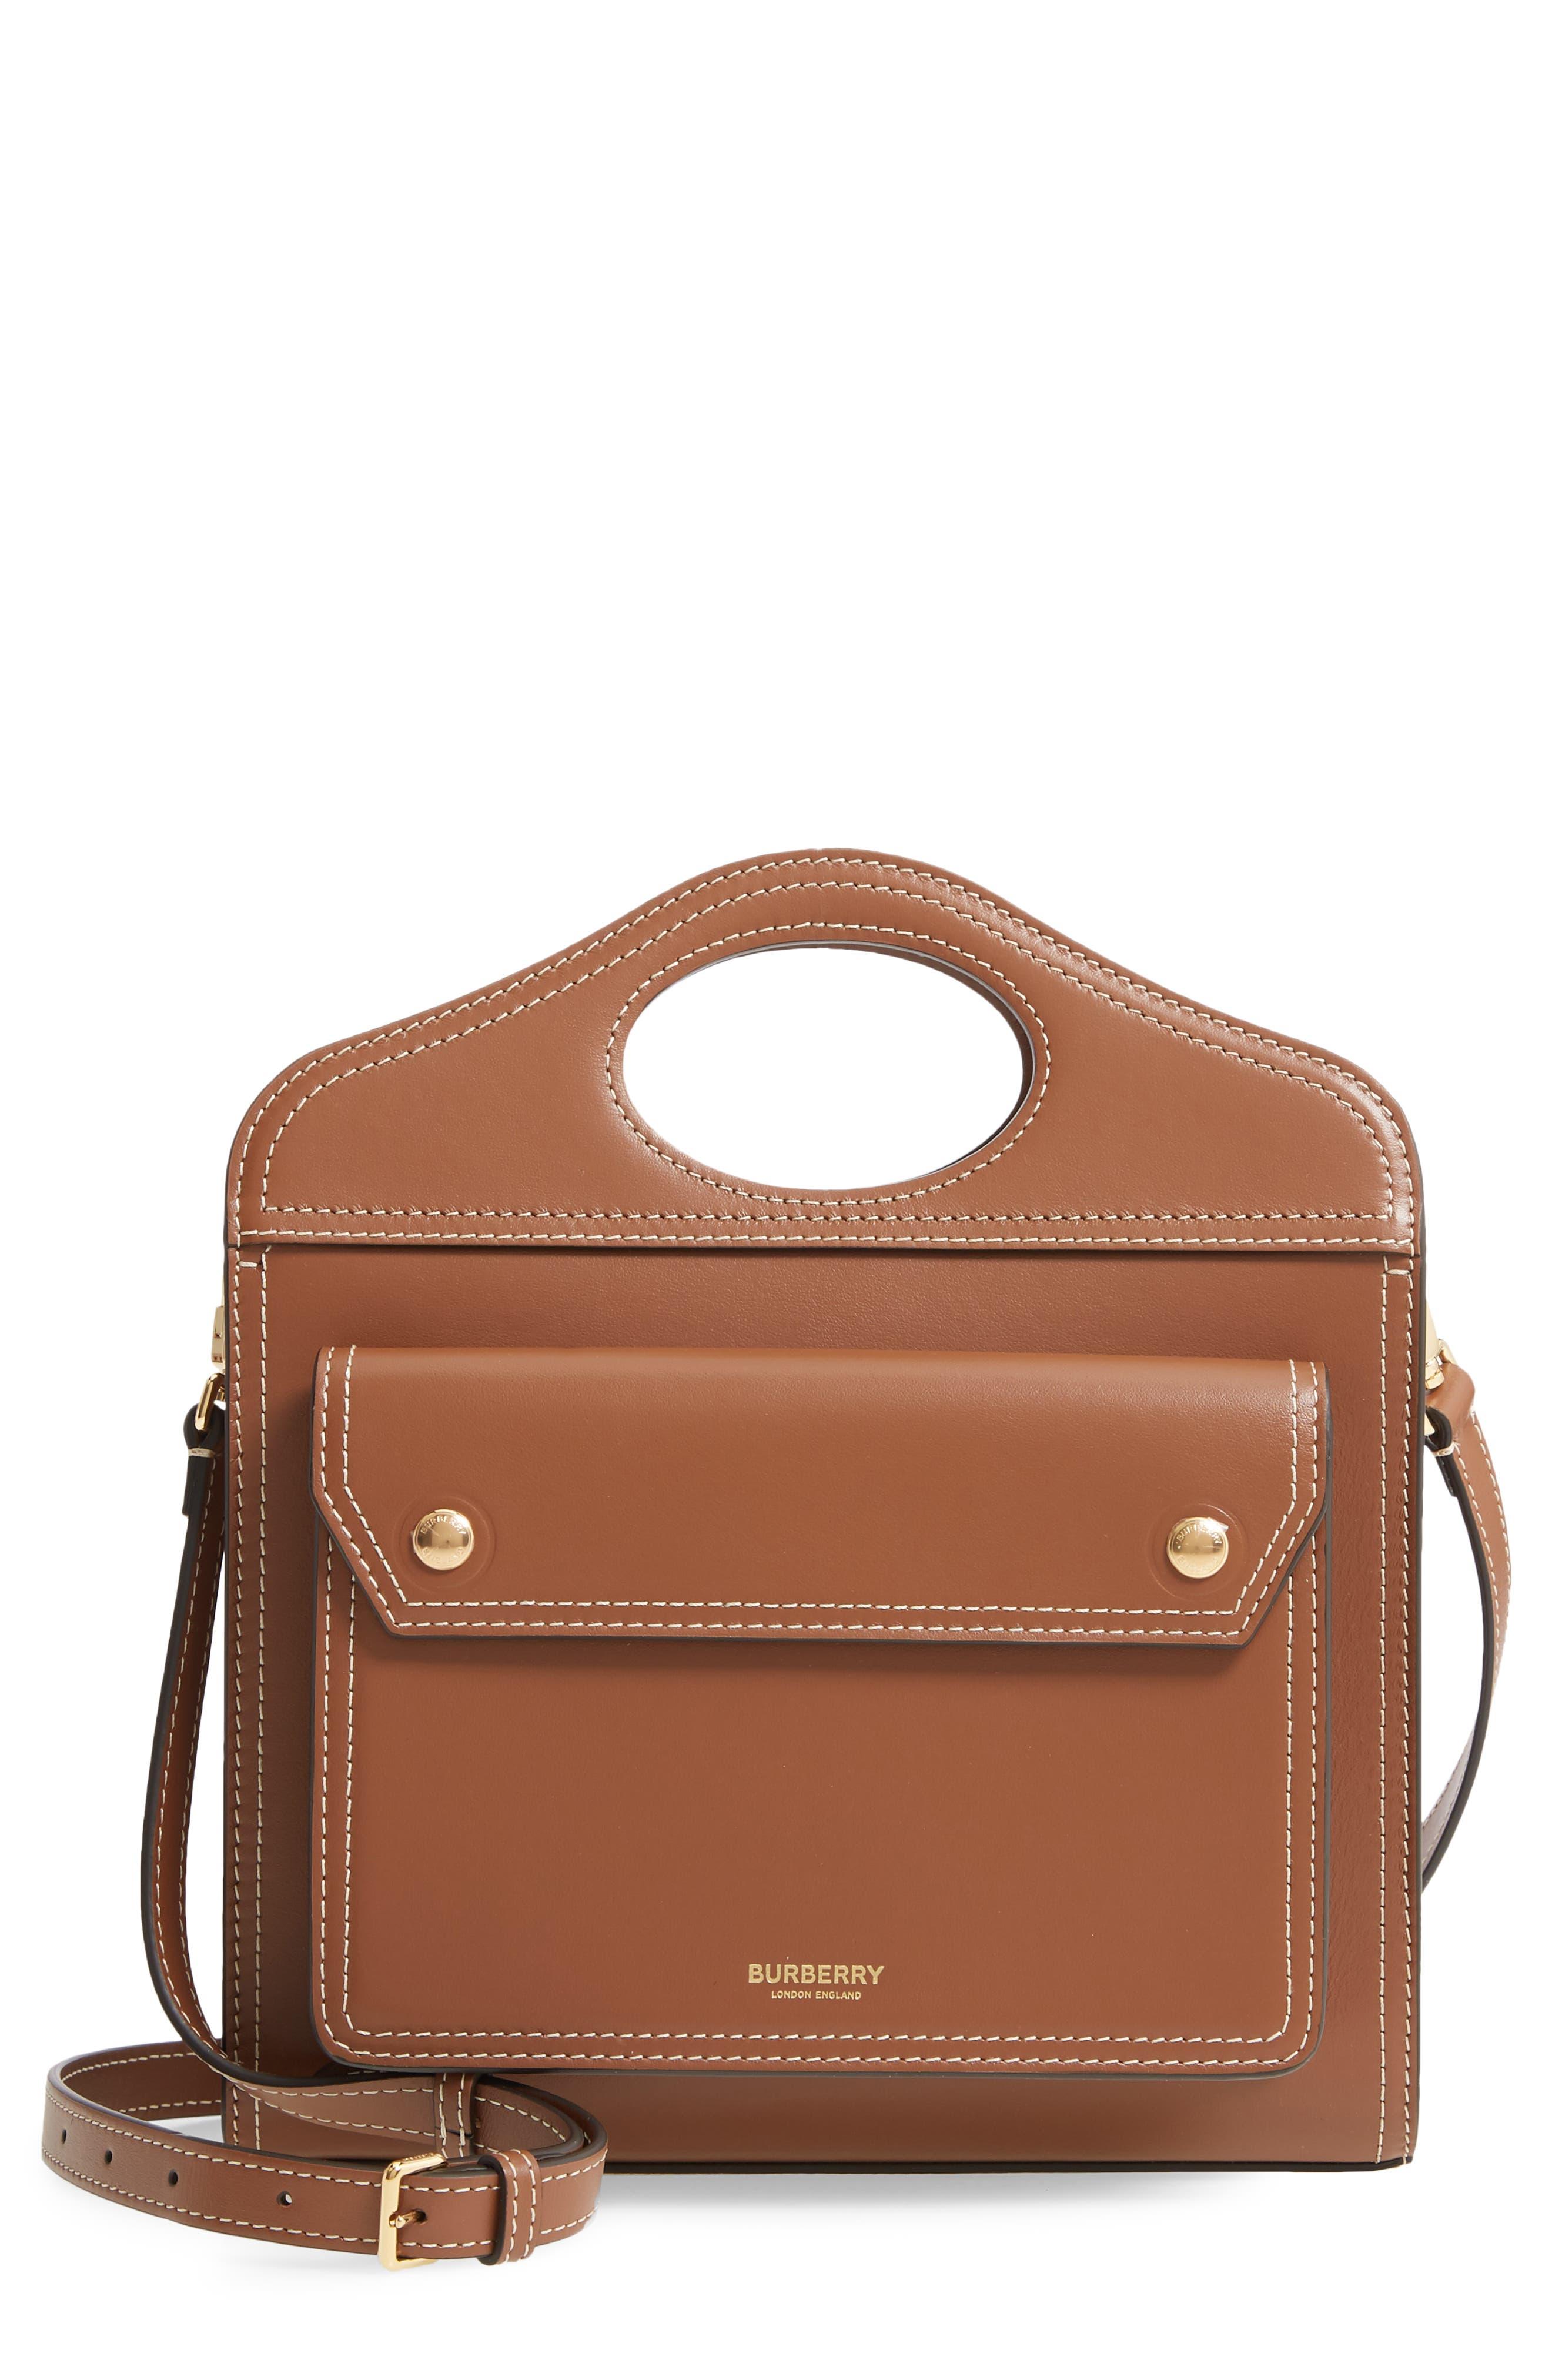 Burberry Mini Topstitched Leather Pocket Bag in Brown | Lyst